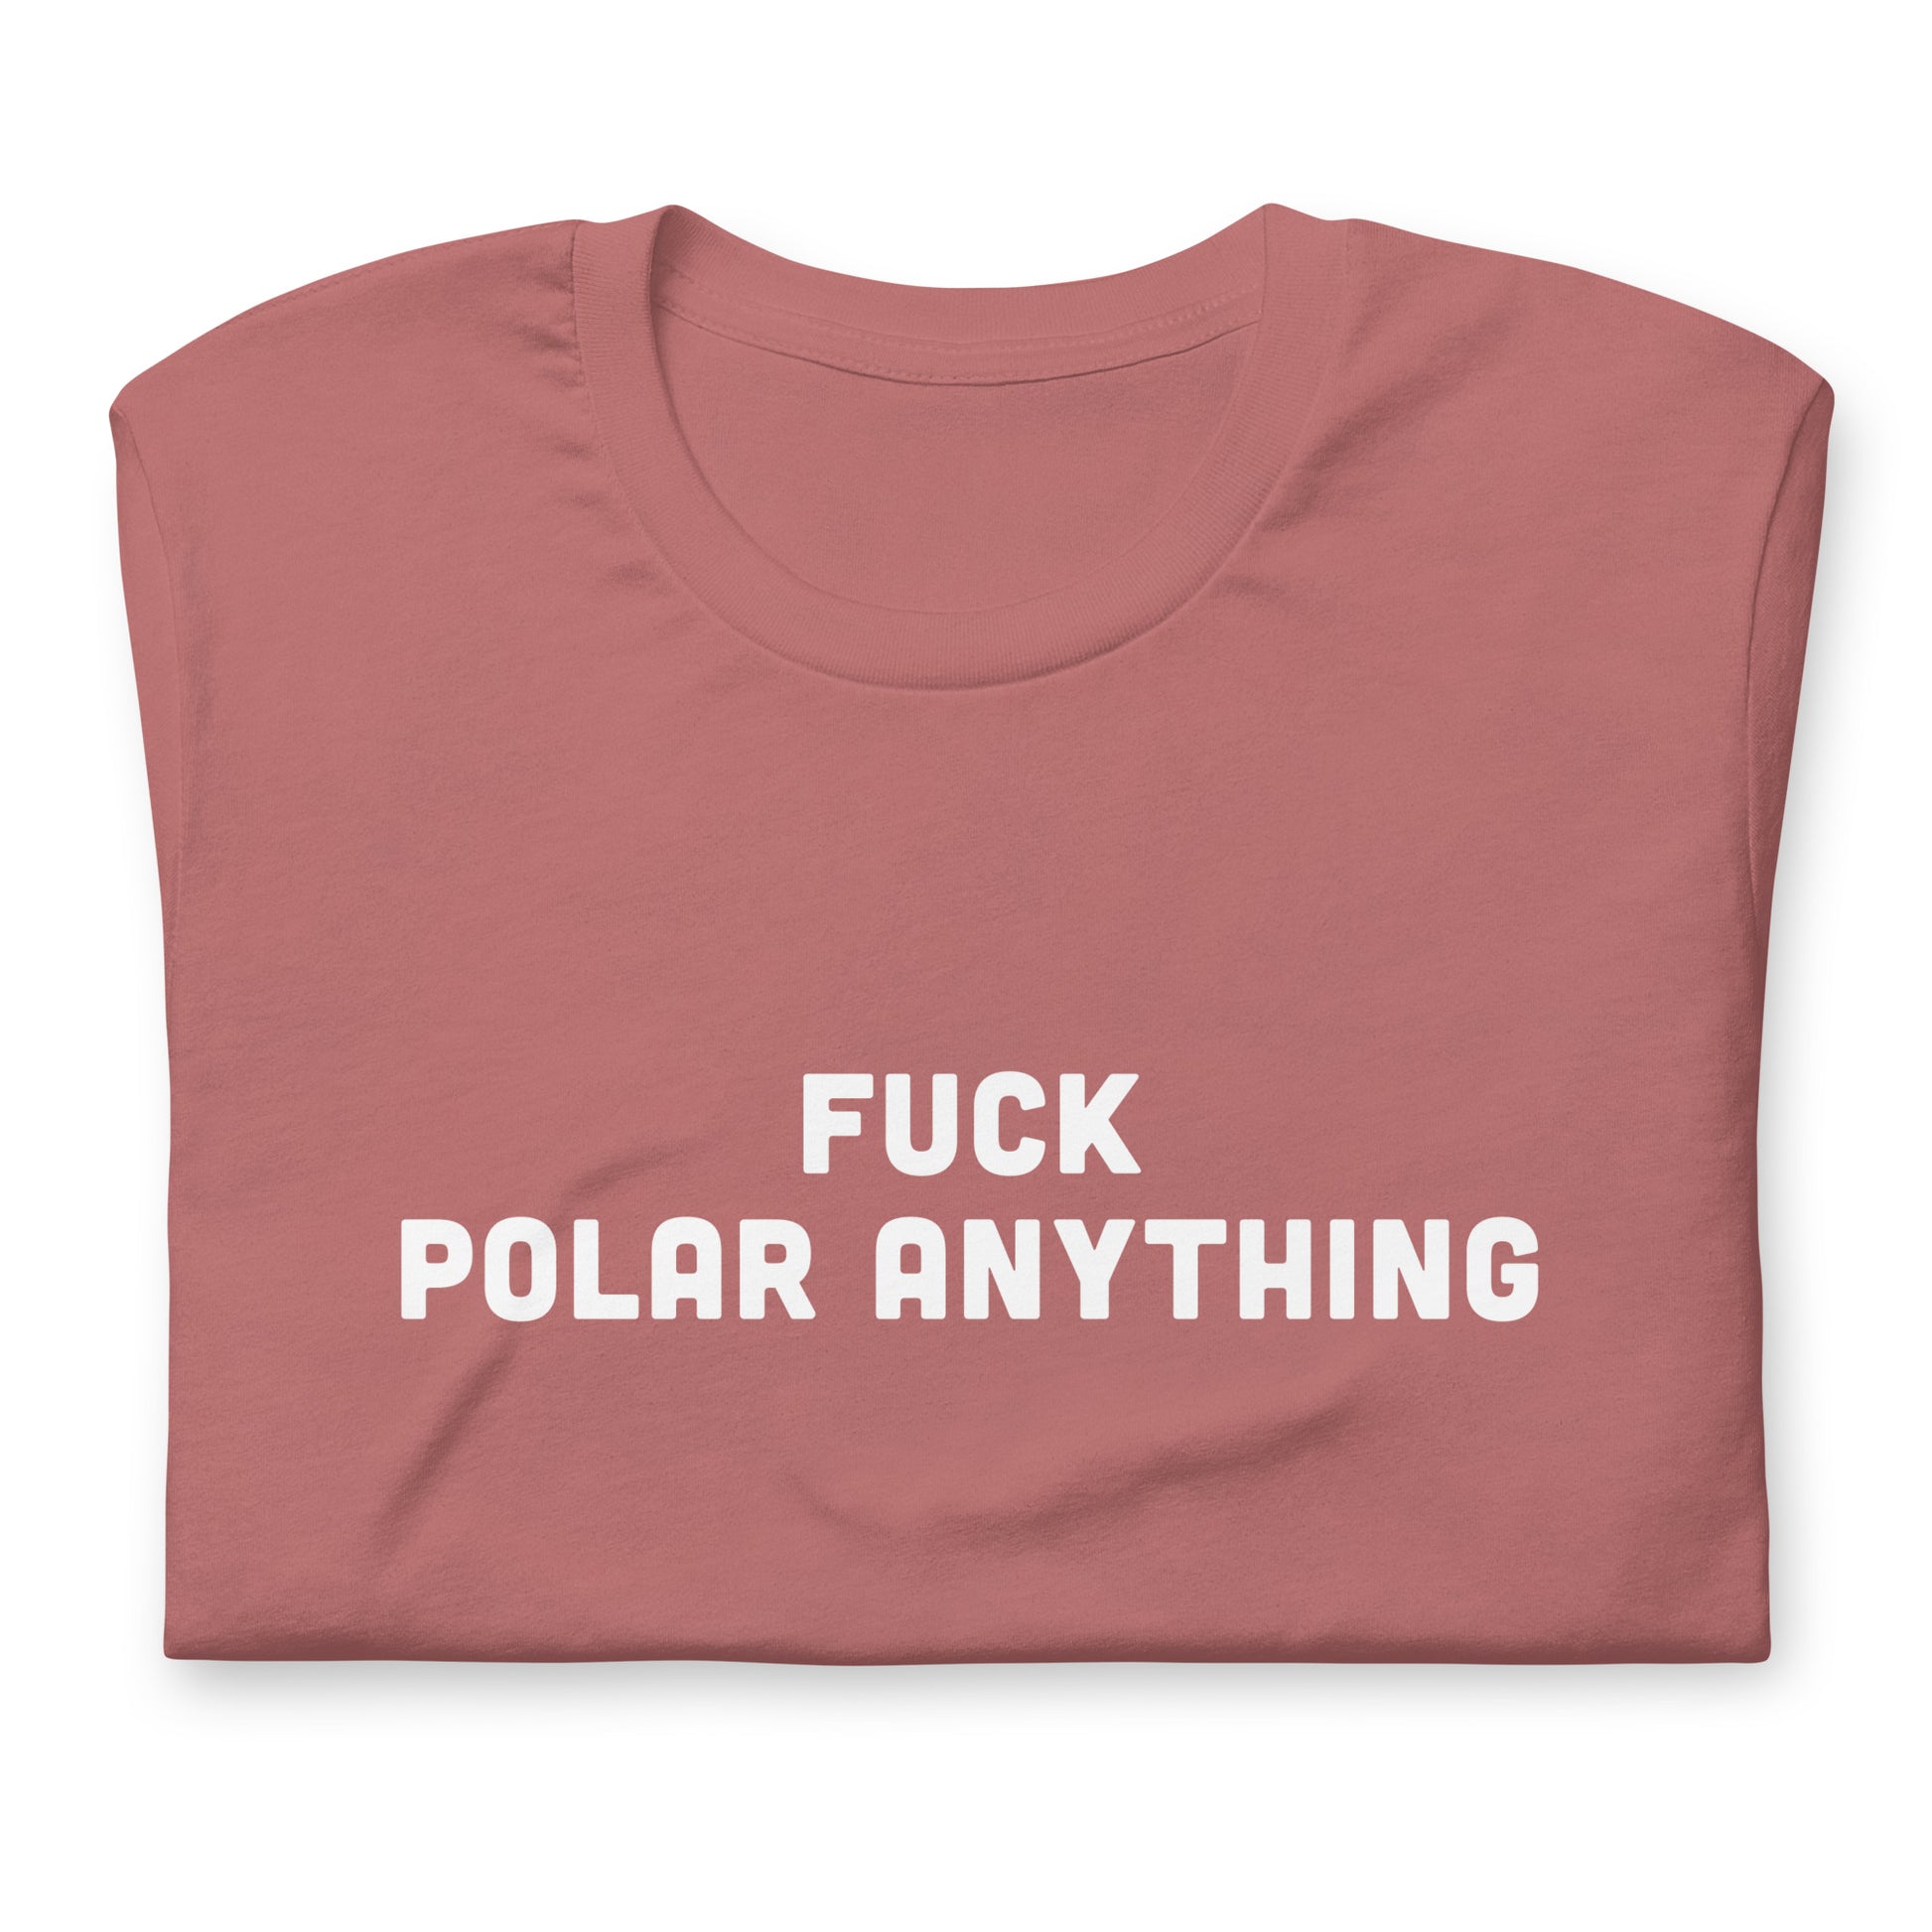 Fuck Polar Anything T-Shirt Size 2XL Color Navy